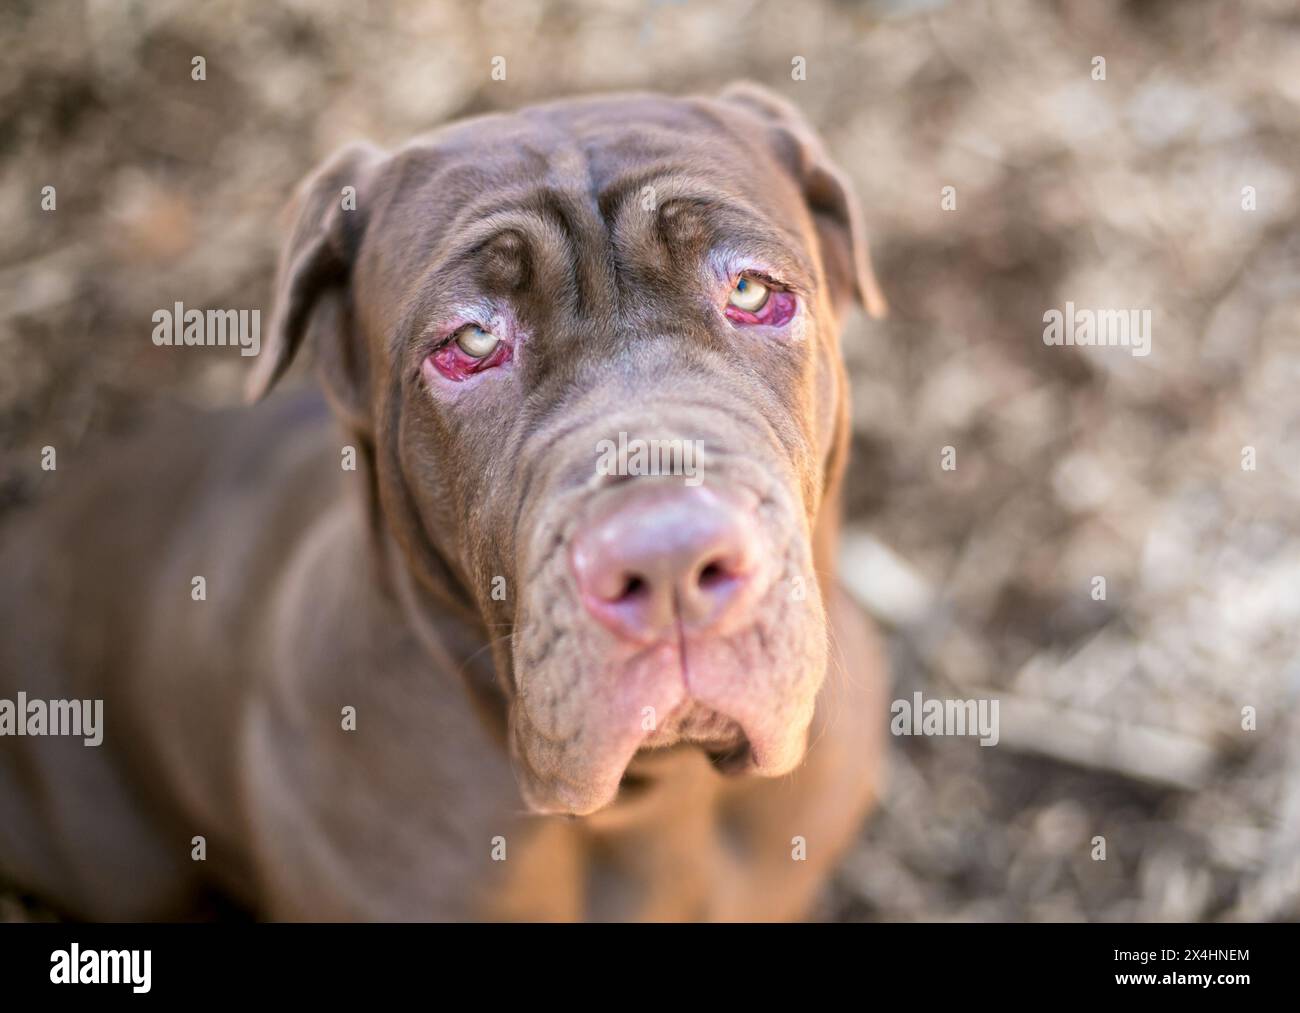 A purebred Neapolitan Mastiff dog with ectropion in its eyes and a sad expression Stock Photo